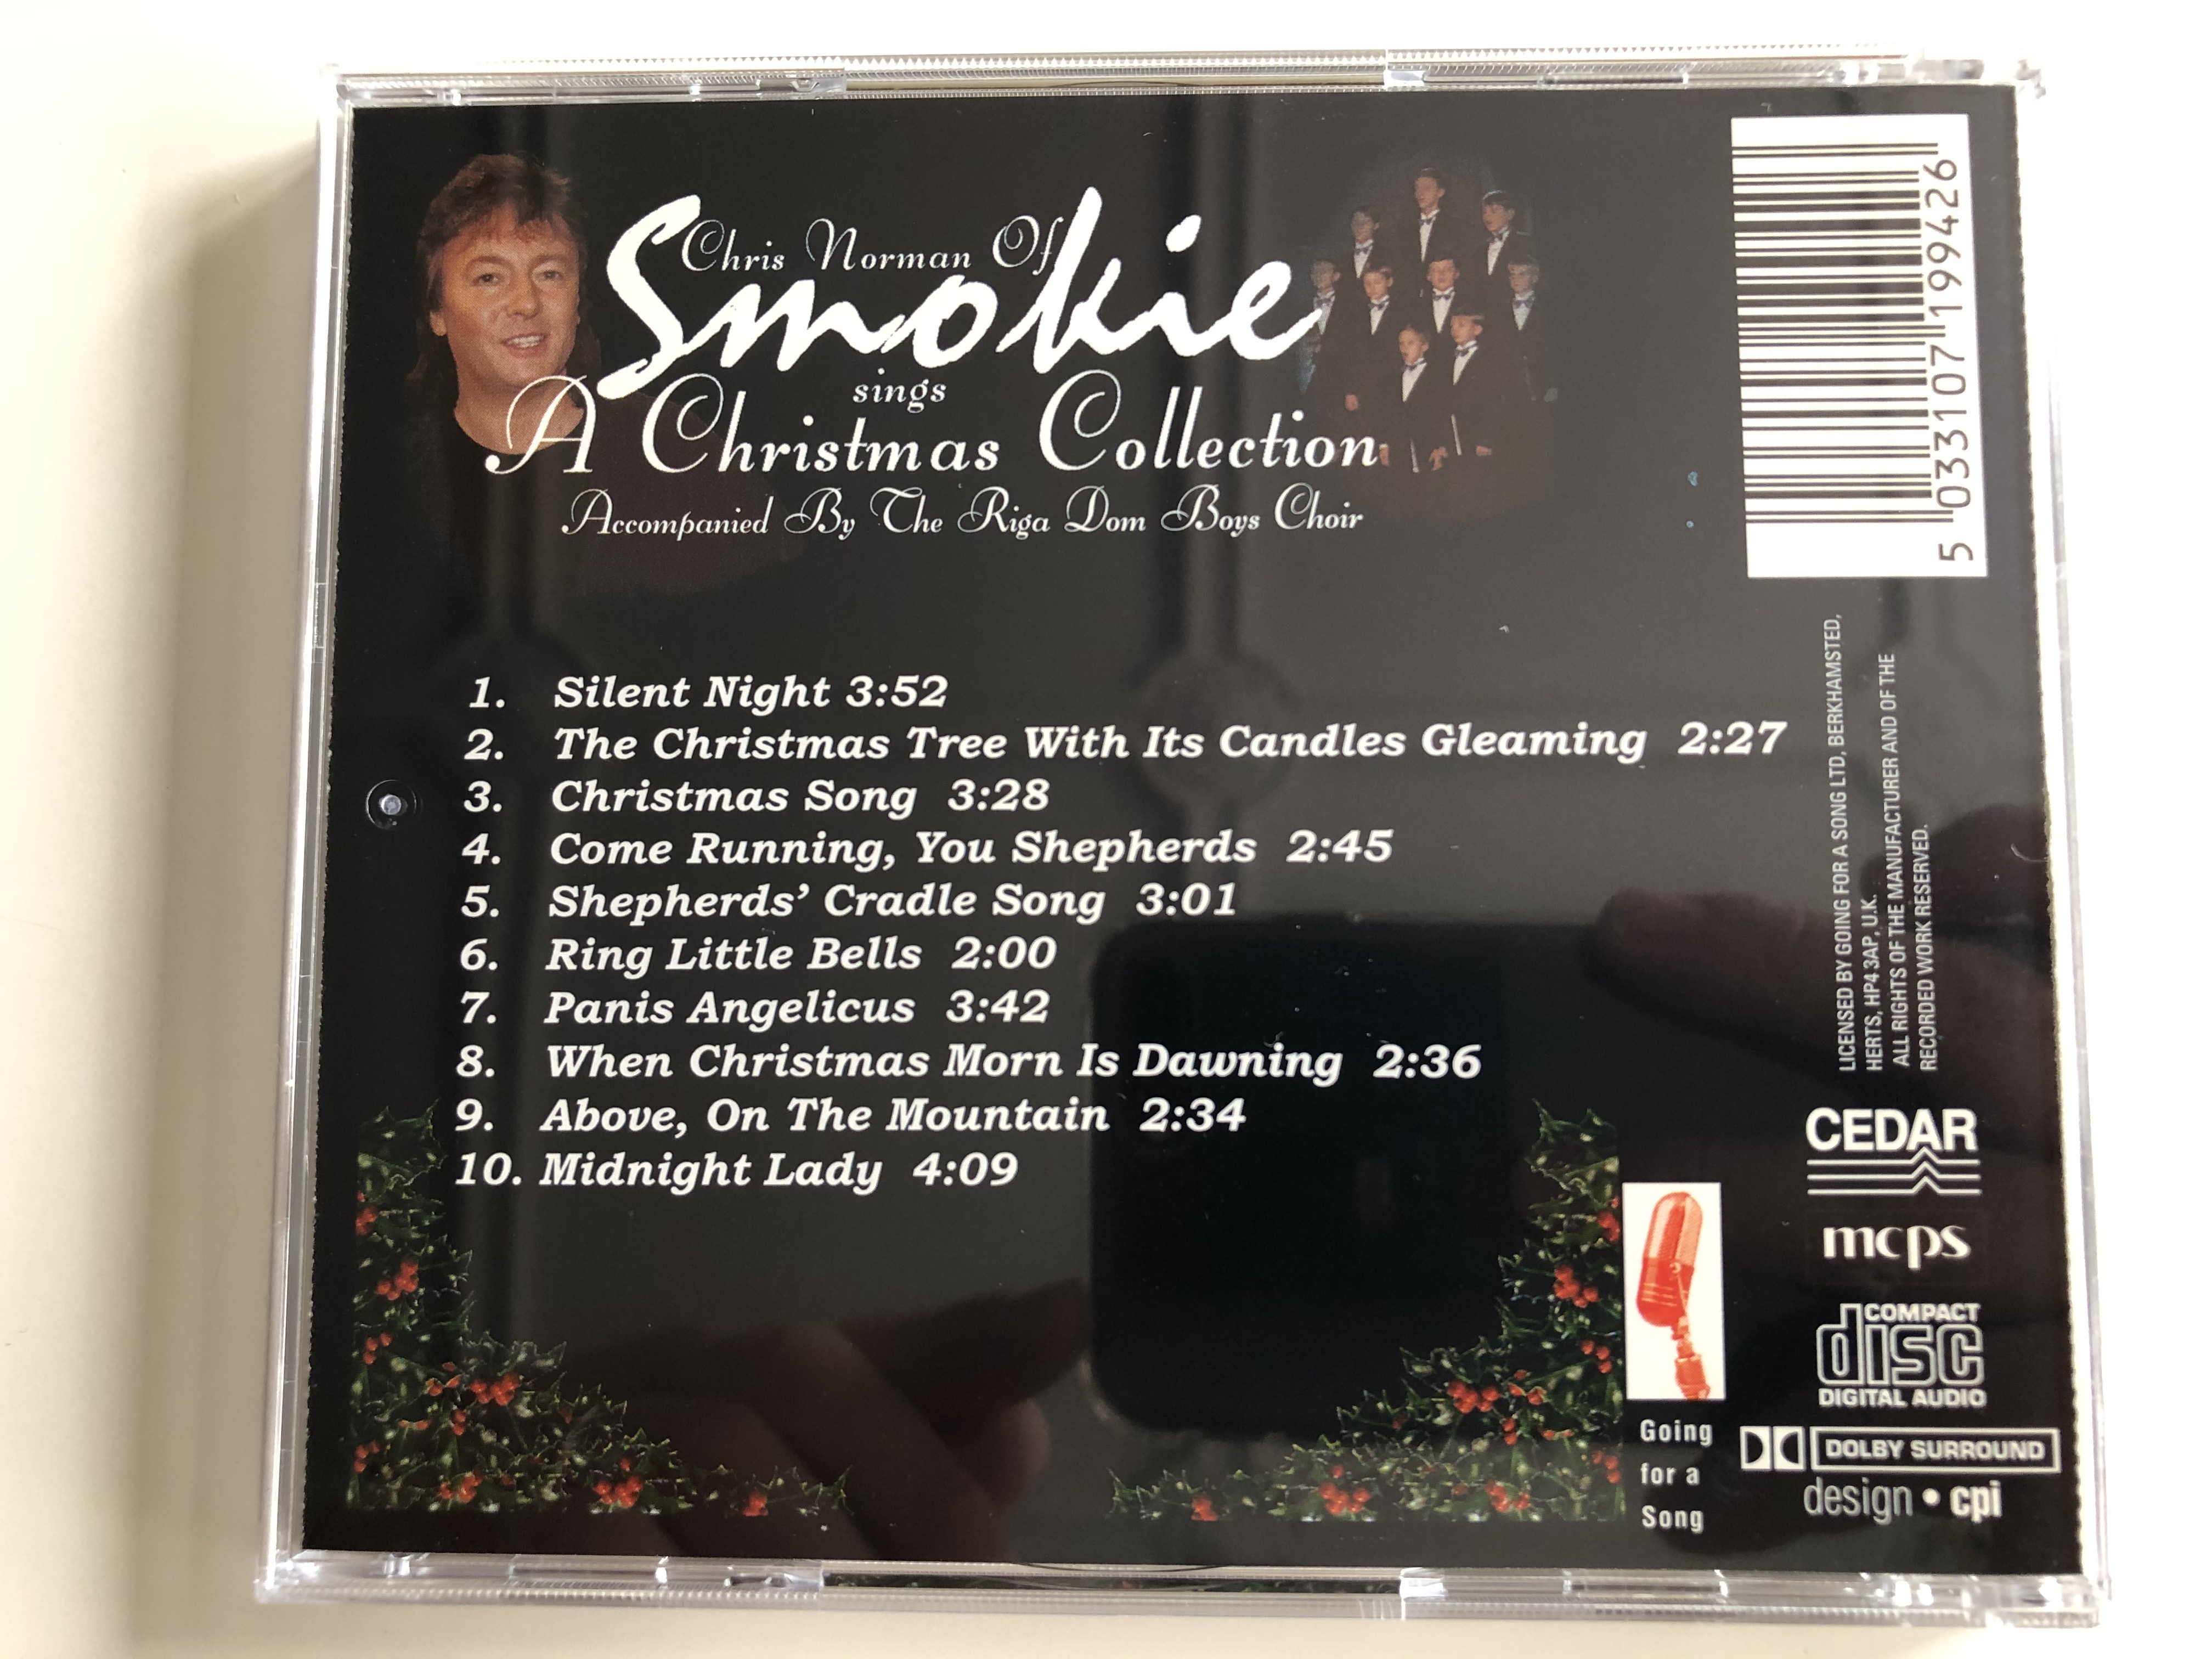 chris-norman-of-smokie-sings-a-christmas-collection-silent-night-panis-angelicus-christmas-song-and-many-more-accompanied-by-the-riga-dom-boys-choir-going-for-a-song-audio-cd-gfs994-5-.jpg